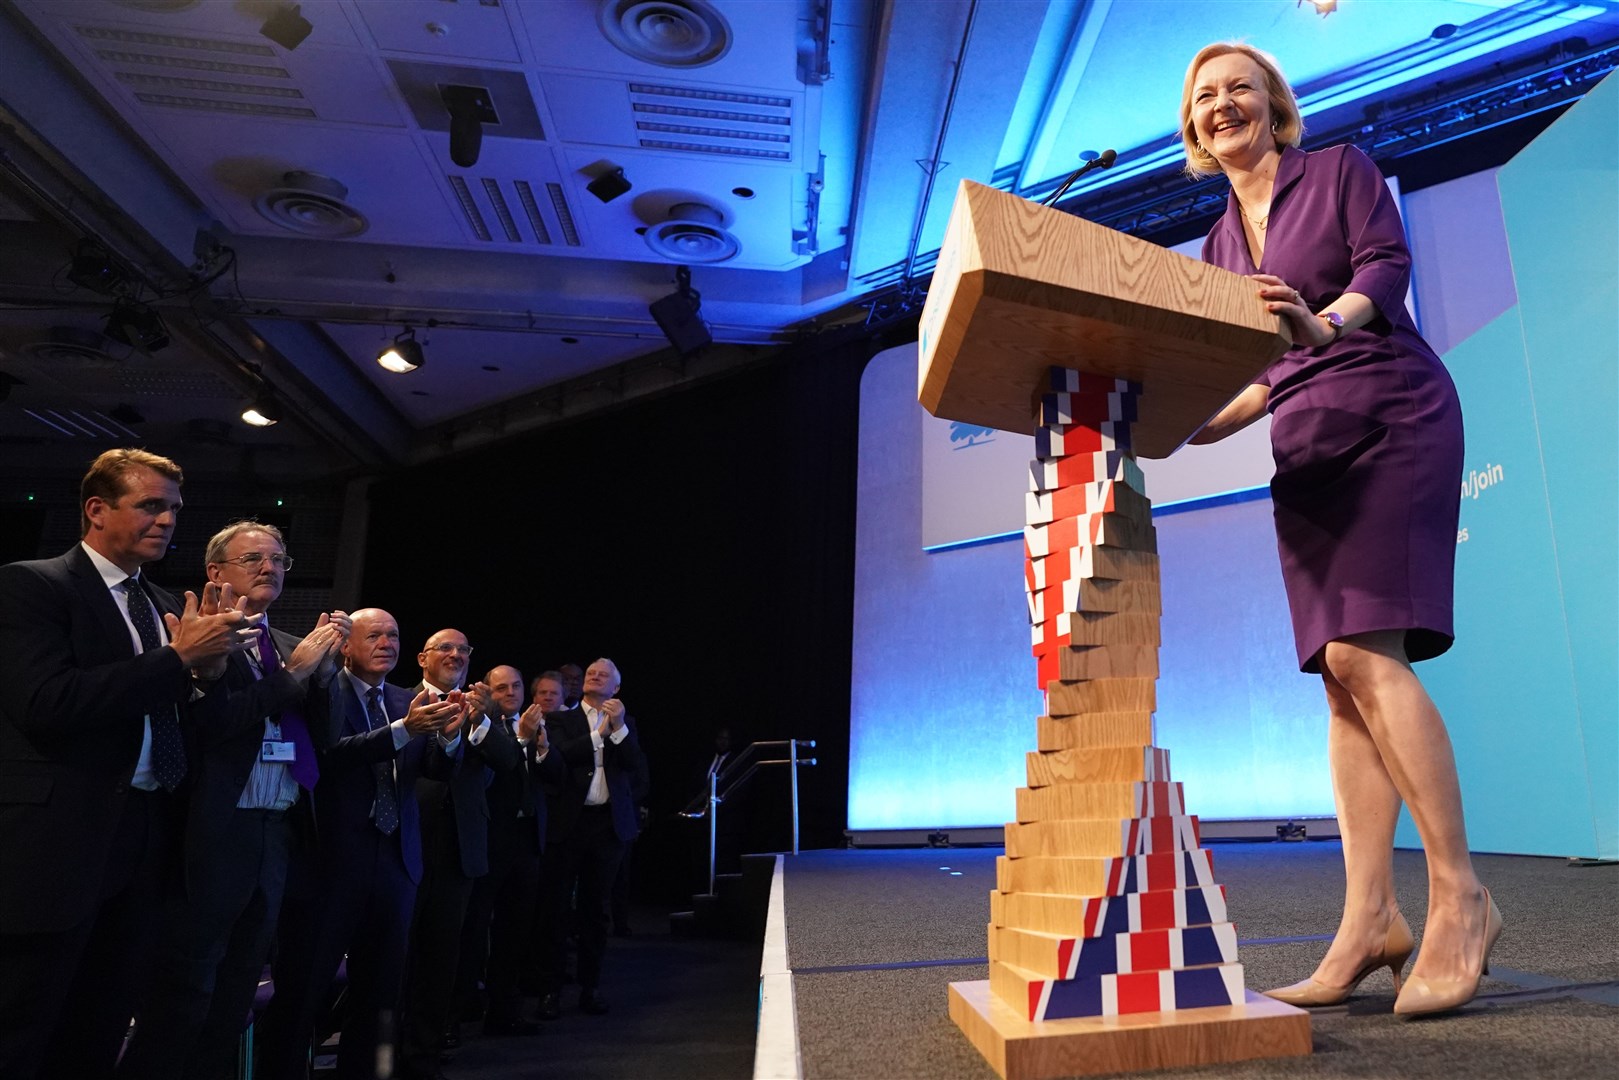 Liz Truss speaks at the Queen Elizabeth II Centre, London, after being announced as the new Conservative Party leader and next prime minister (Stefan Rousseau/PA)